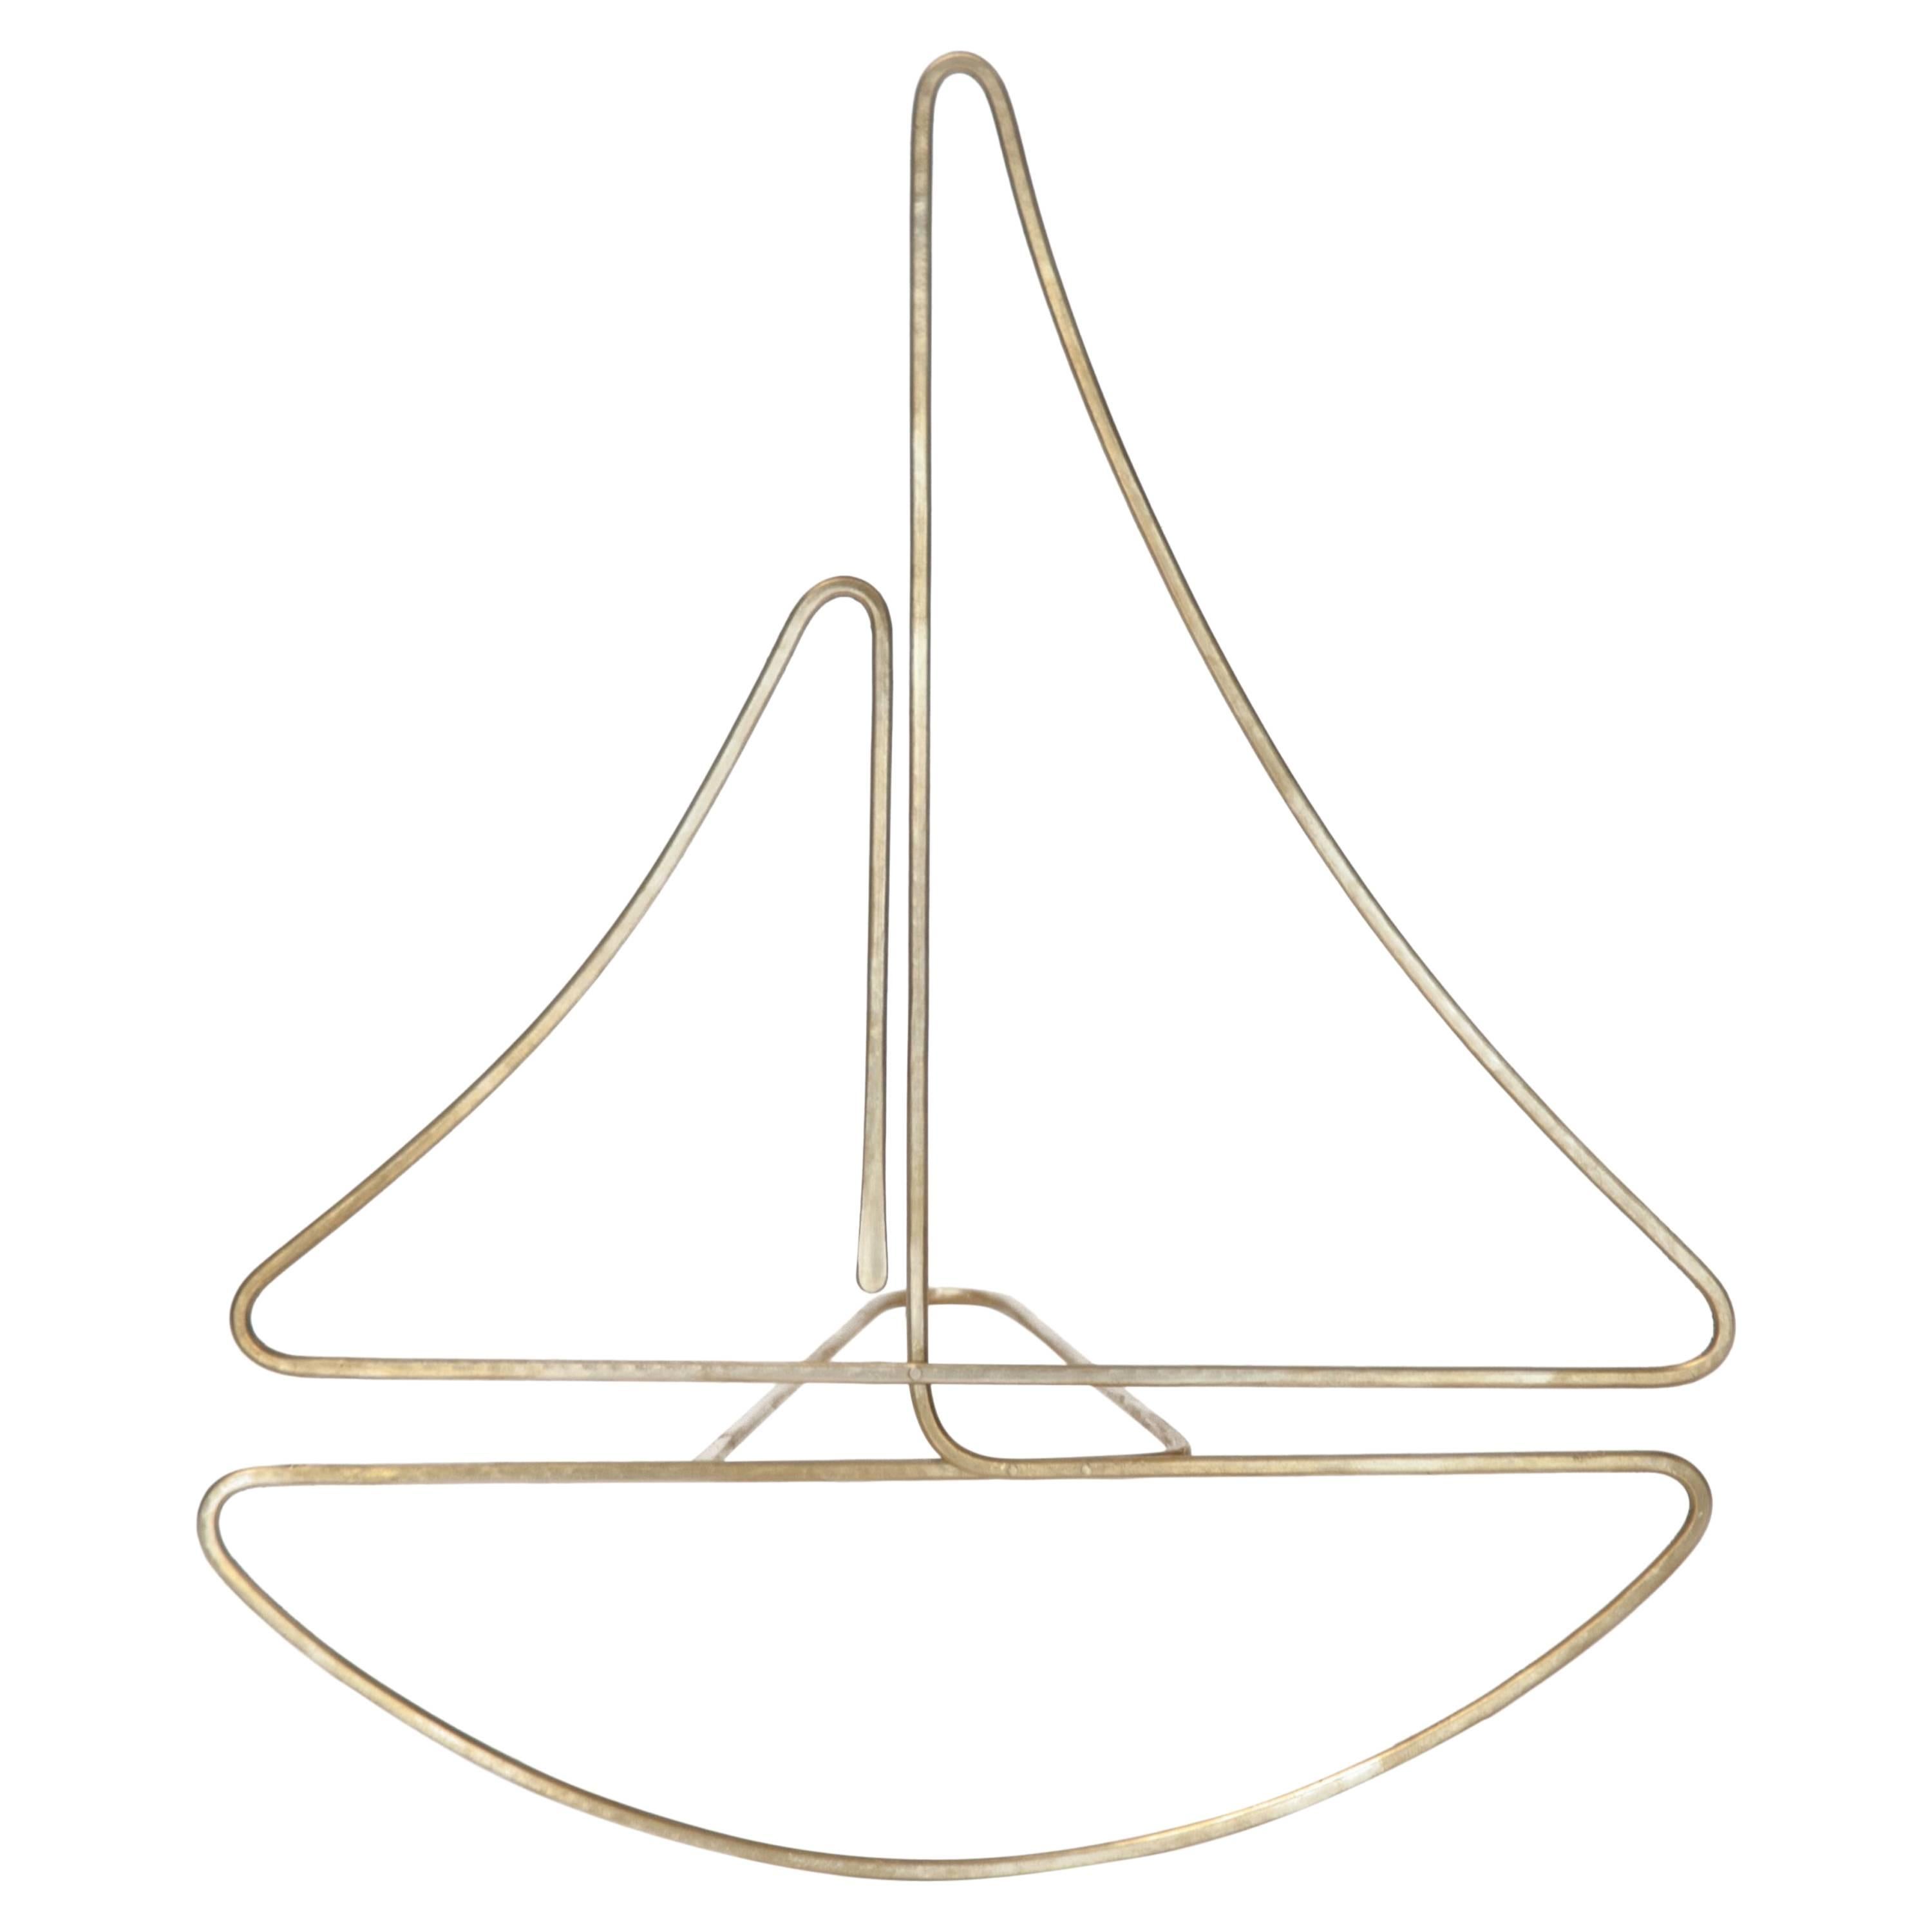 Sailboat by Rodger Stevens, Kinetic Sculpture in Brass, 2018 For Sale